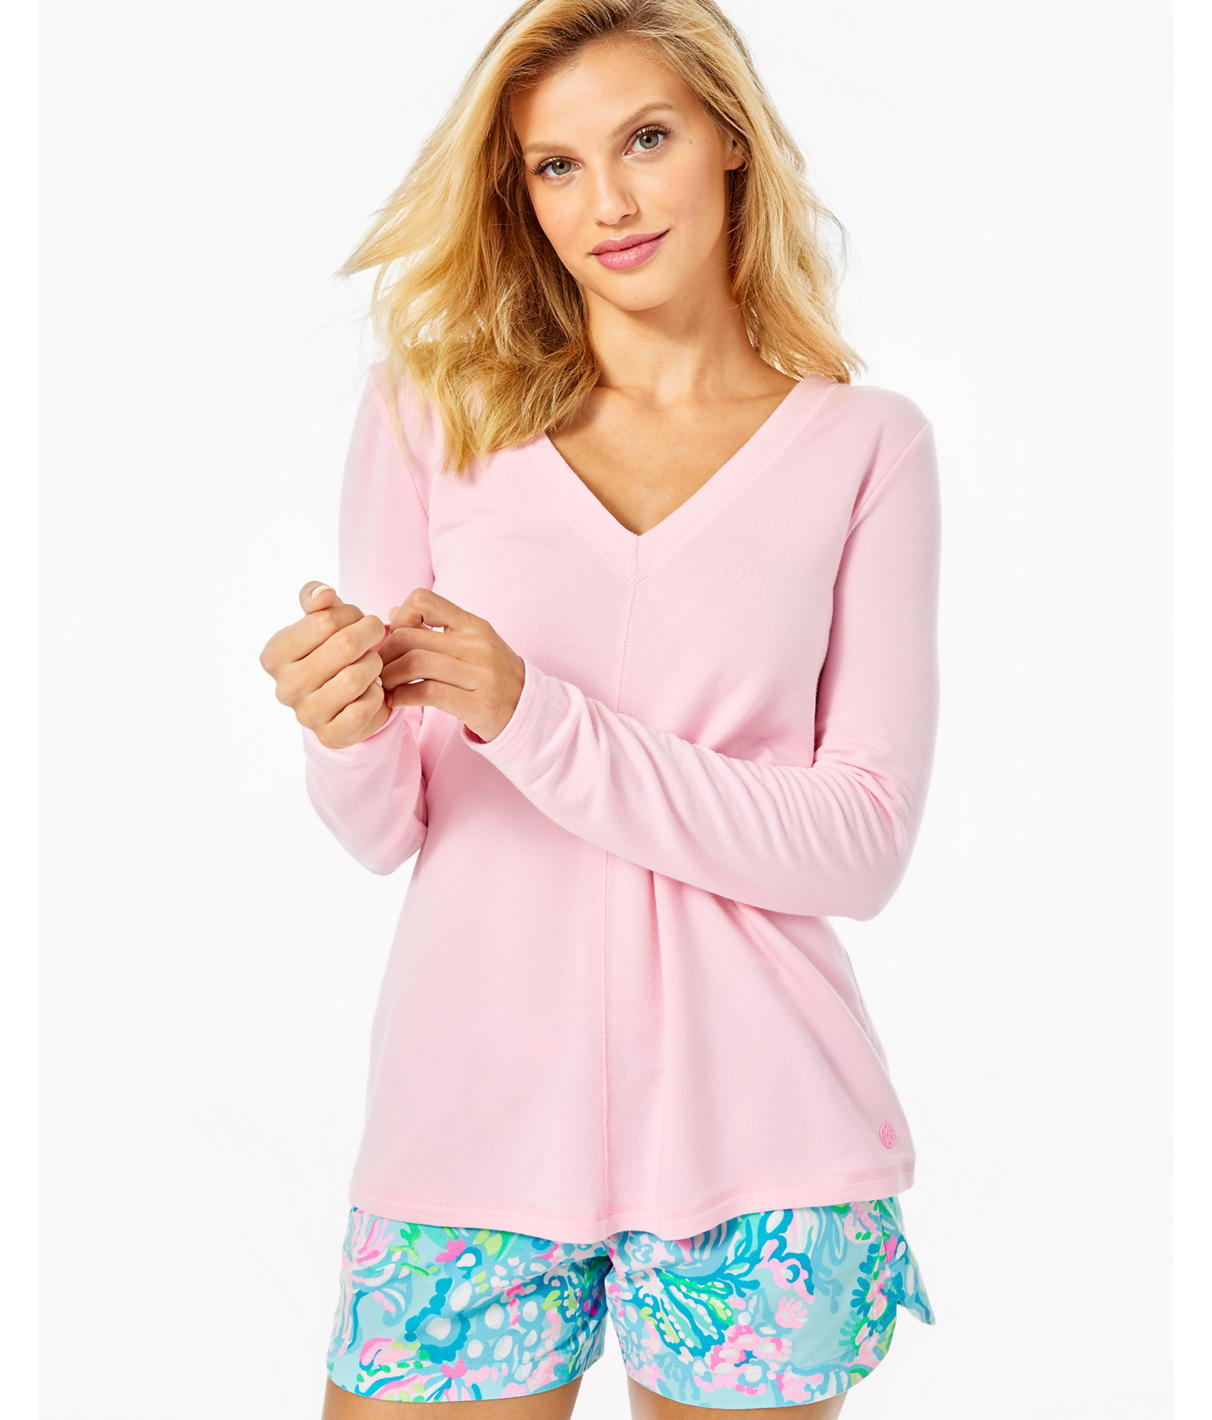 LILLY PULITZER WOMEN'S LUXLETIC ARELI PULLOVER IN RED SIZE MEDIUM - LILLY PULITZER,004026